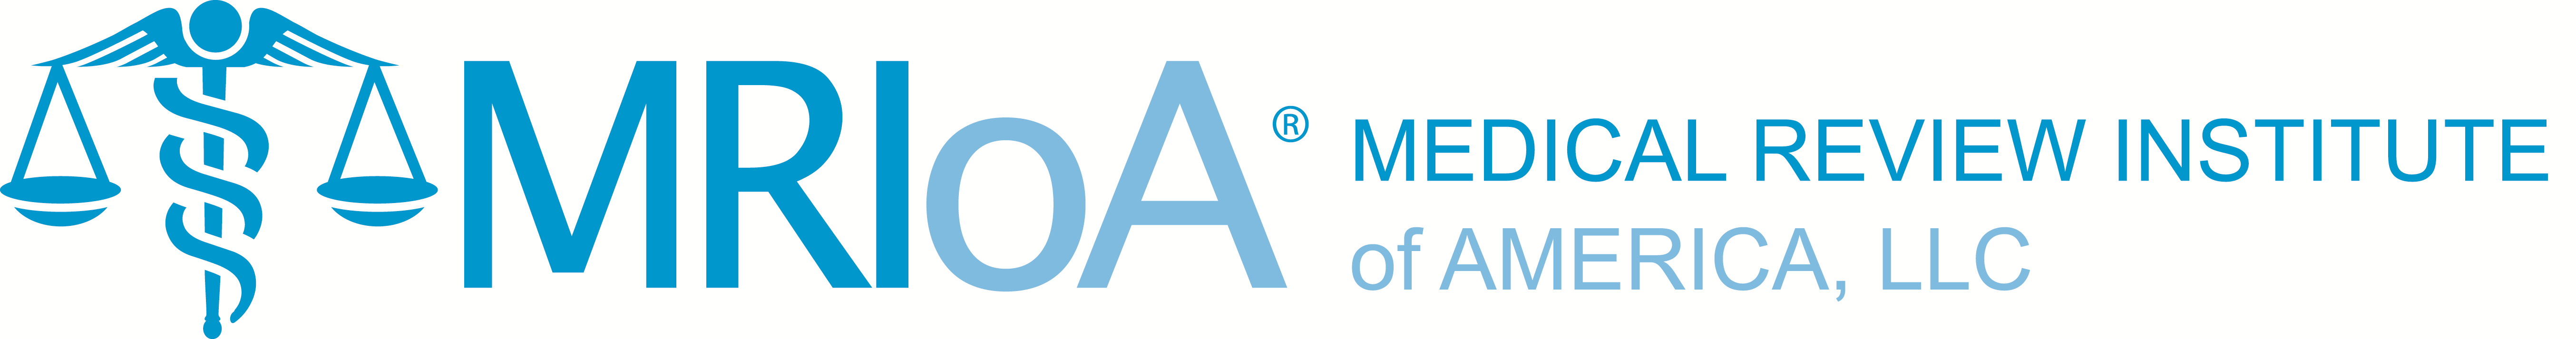 Medical Review Institute of America Company Logo